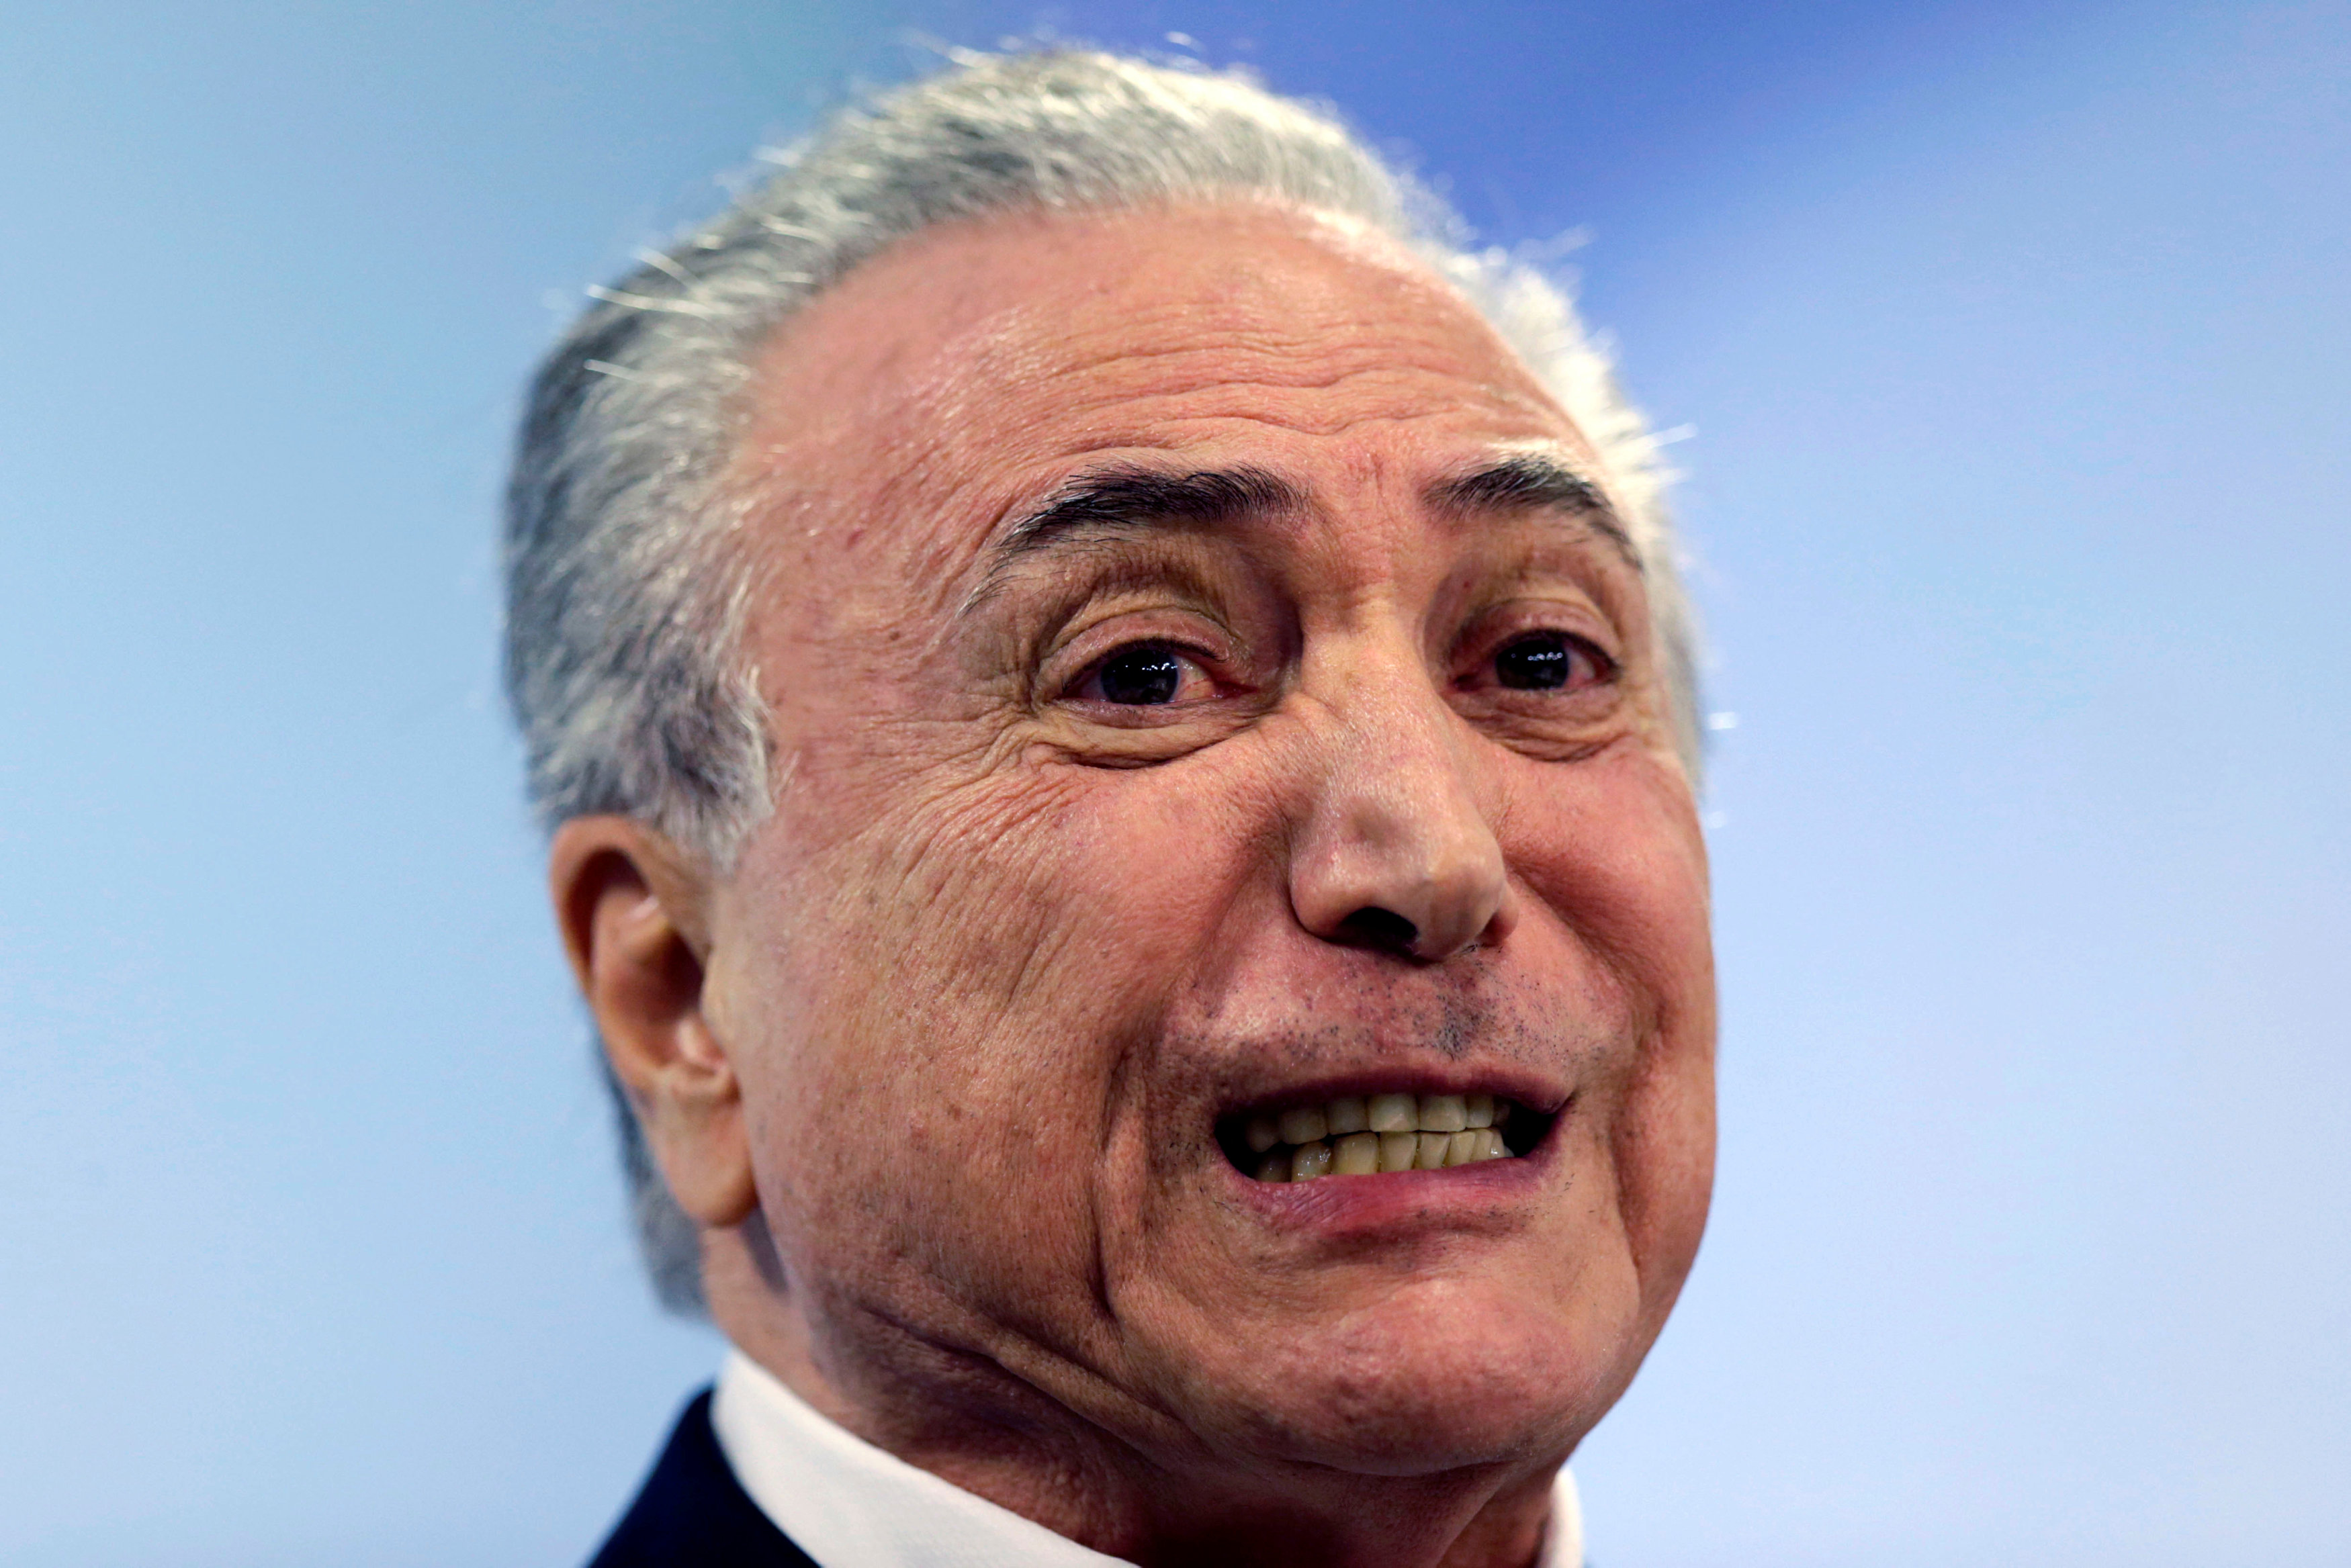 I won't resign. Oust me if you want: Temer